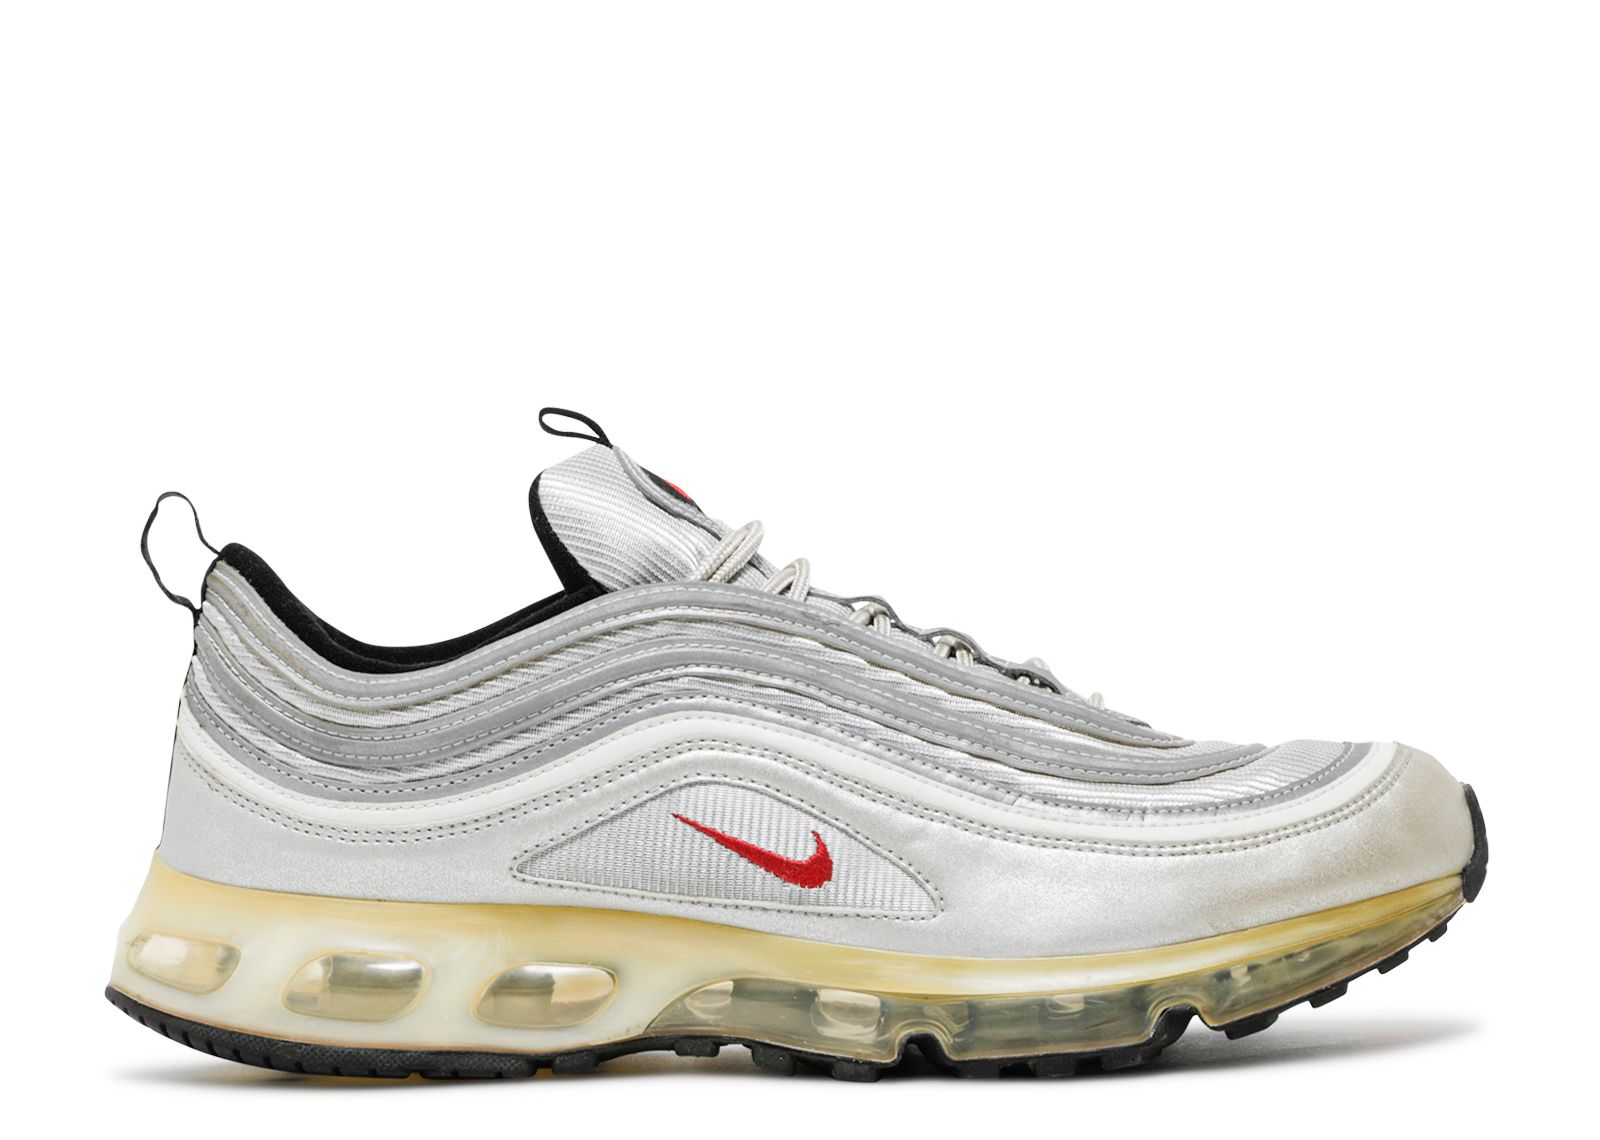 Air Max 97 360 'One Time Only' - Nike - 315349 061 - metallic  silver/varsity red-white-black | Flight Club